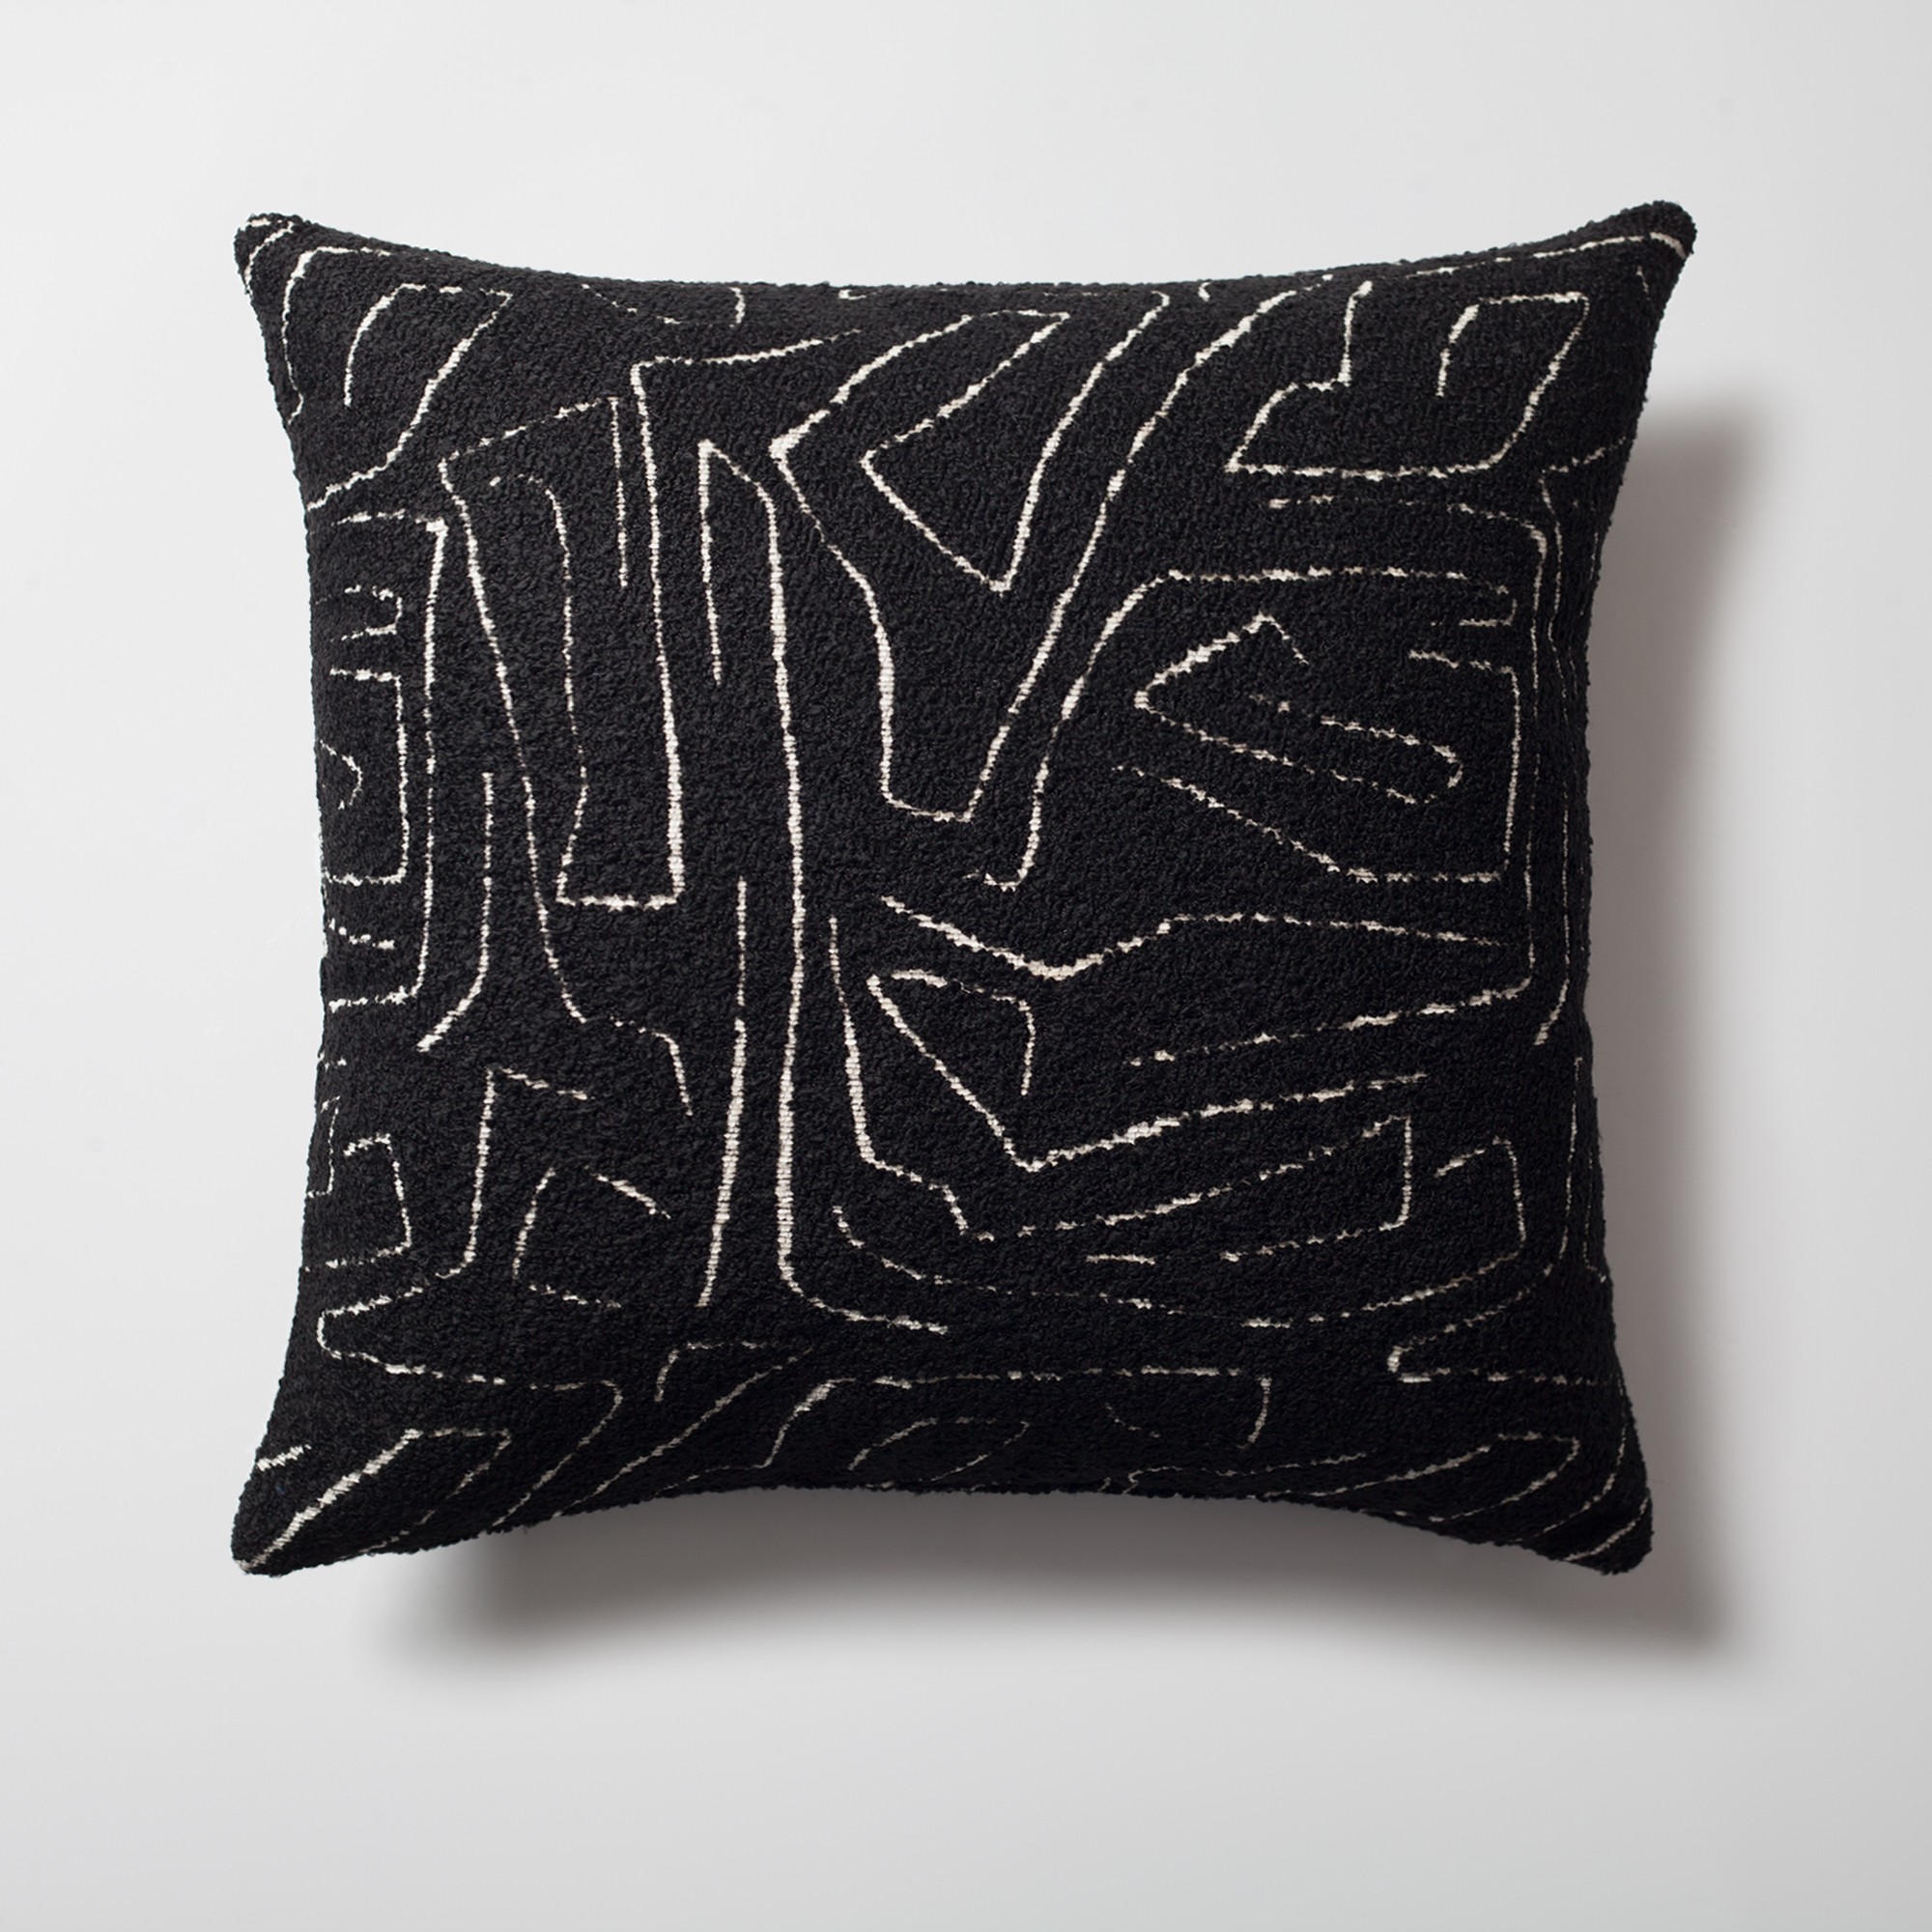 "Amorf" - Abstract Patterned 20x20 Inch Cushion - Black and White (Cover Only)